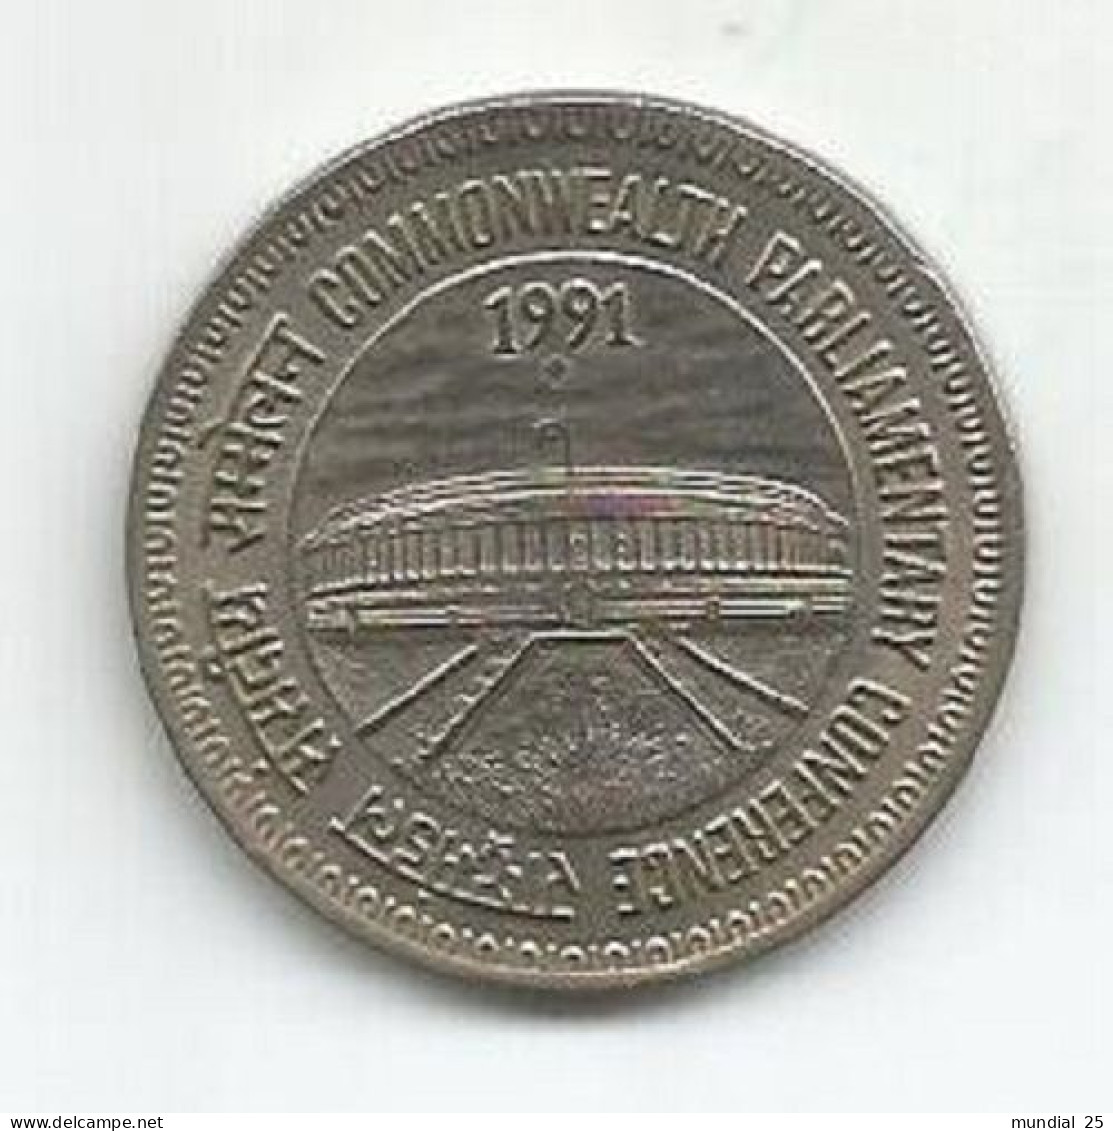 INDIA 1 RUPEE 1991 - COMMONWEALTH PARLIAMENTARY CONFERENCE - India